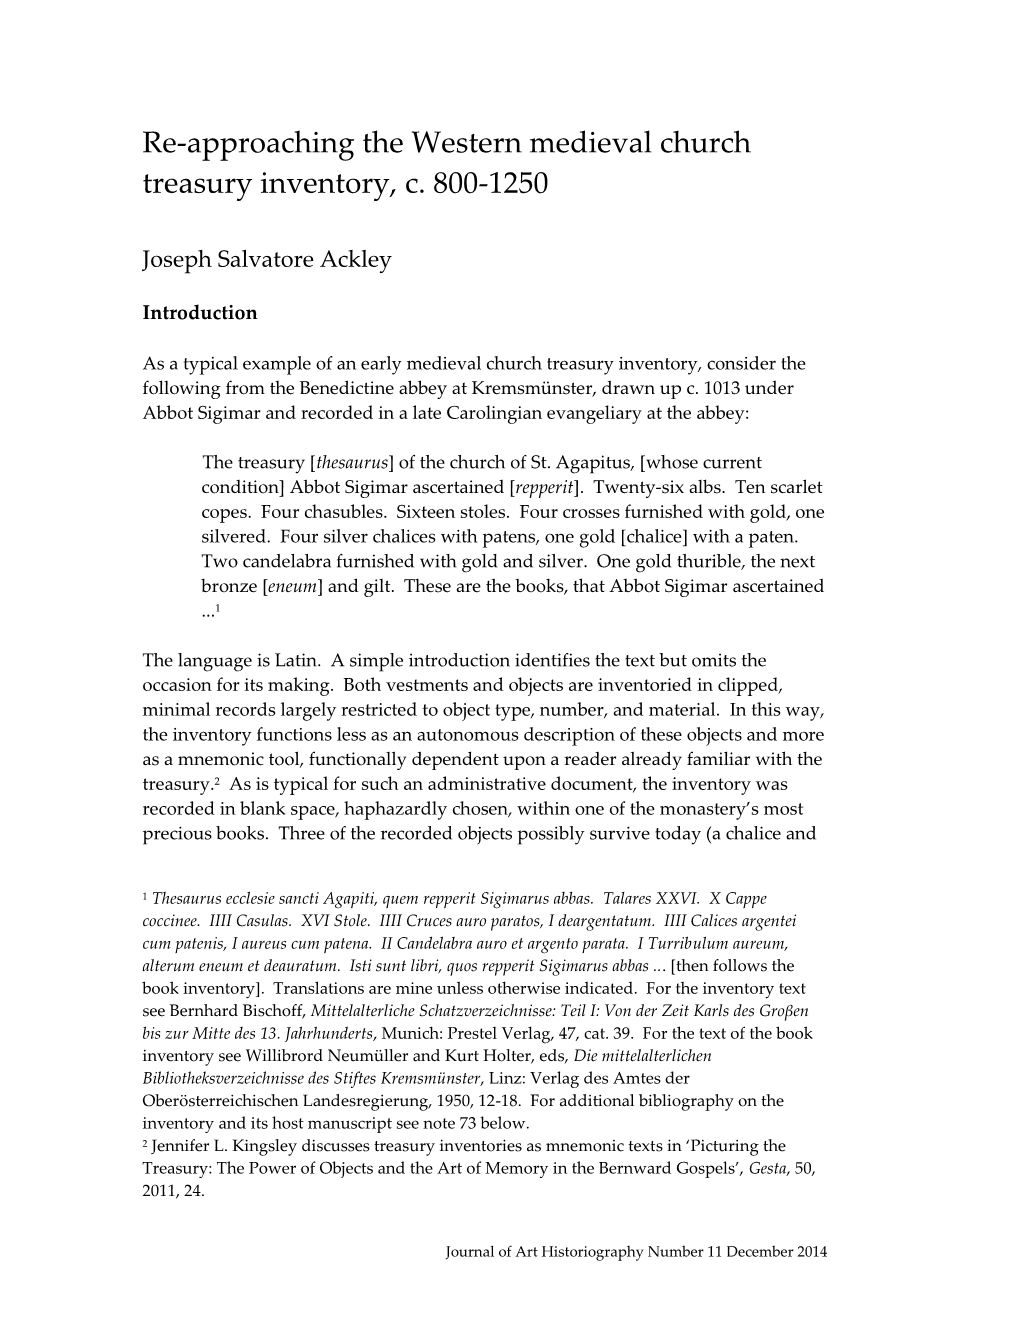 Re-Approaching the Western Medieval Church Treasury Inventory, C